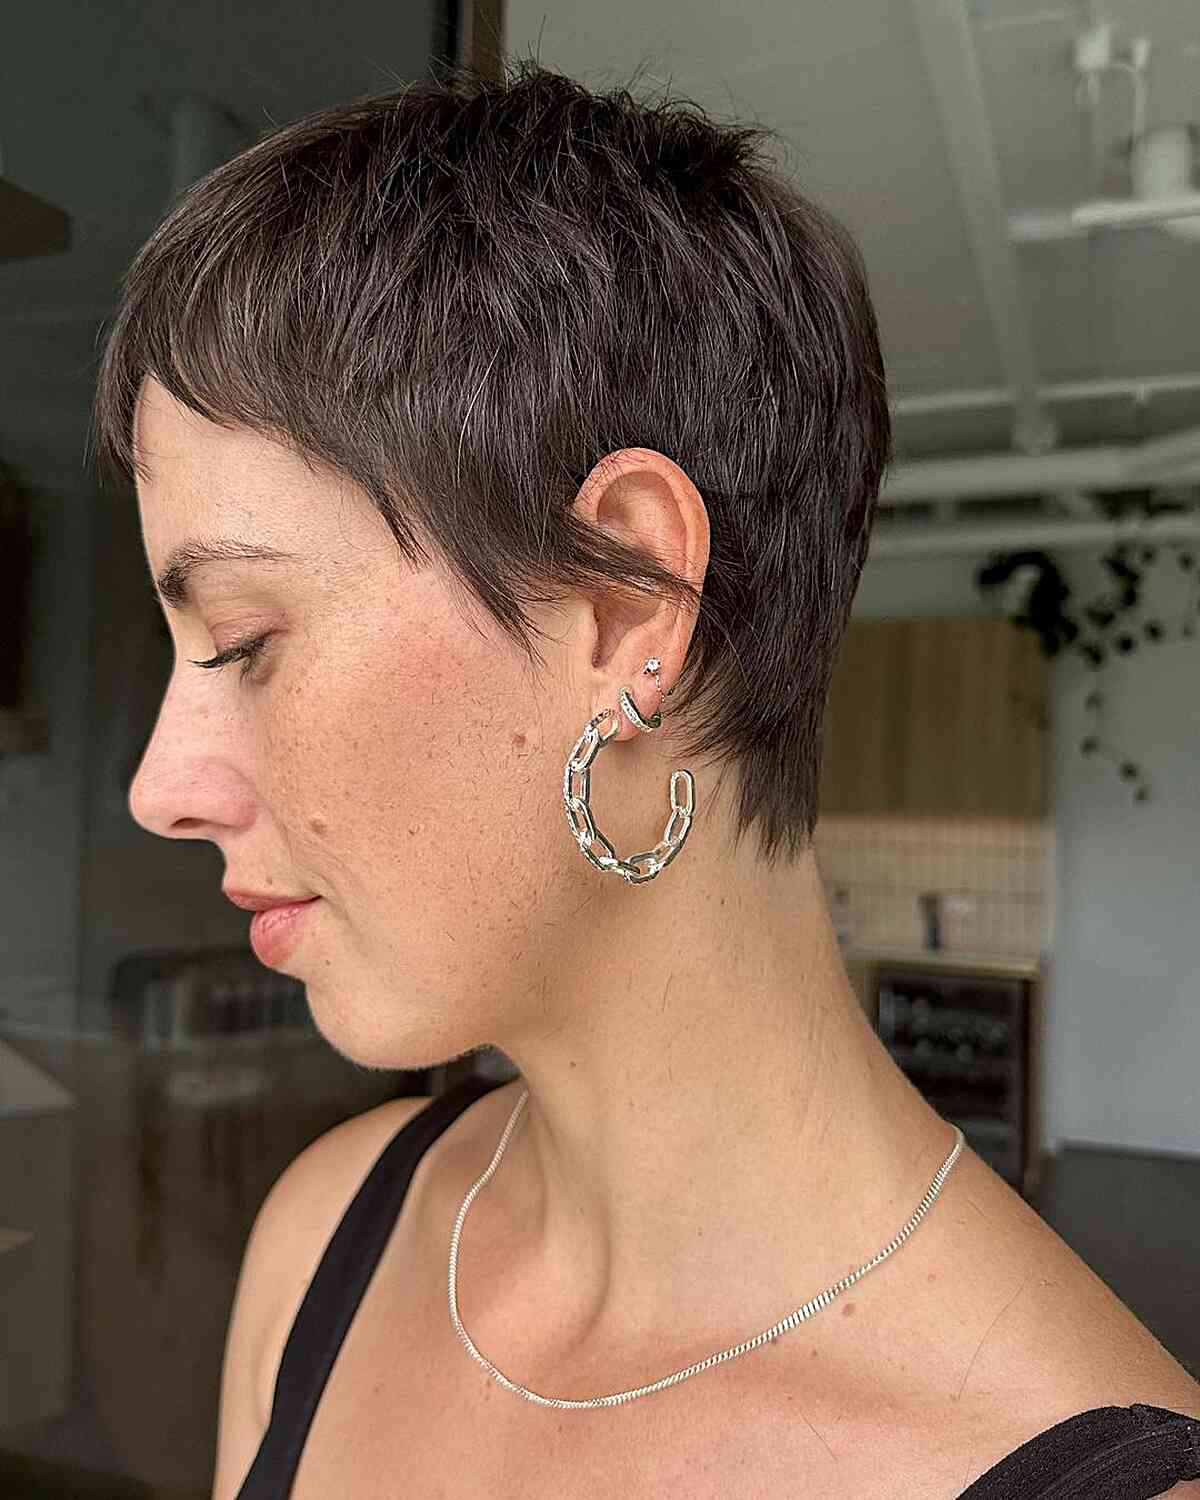 Short Dark Low-Maintenance Tapered Pixie with Soft Texture on Fine Hair